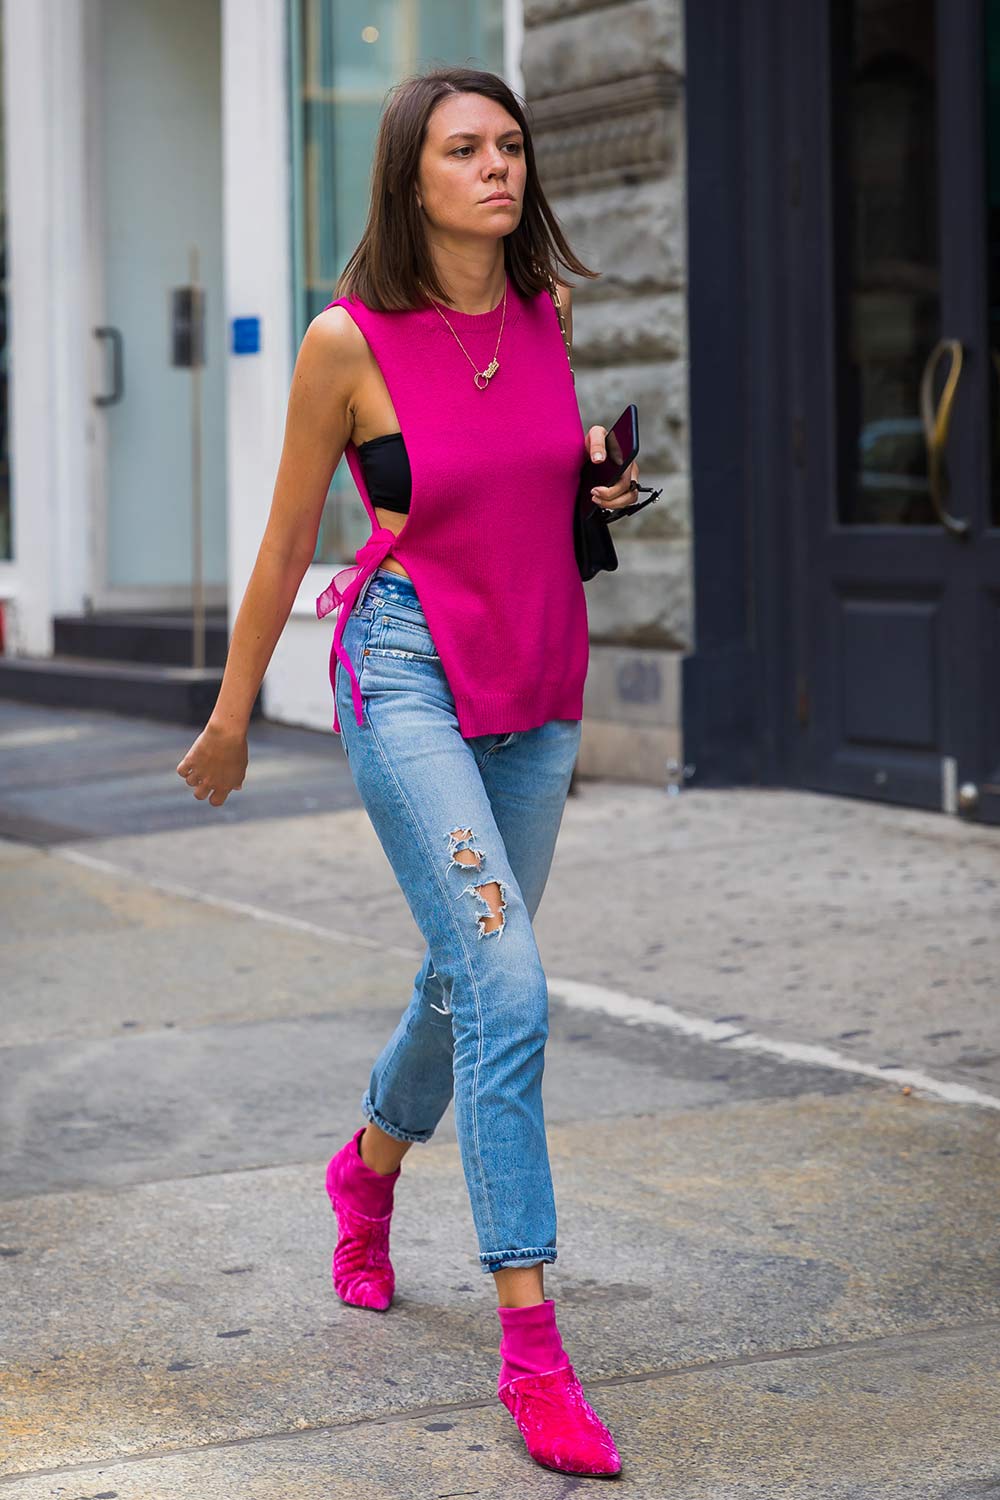 denim and pink outfits